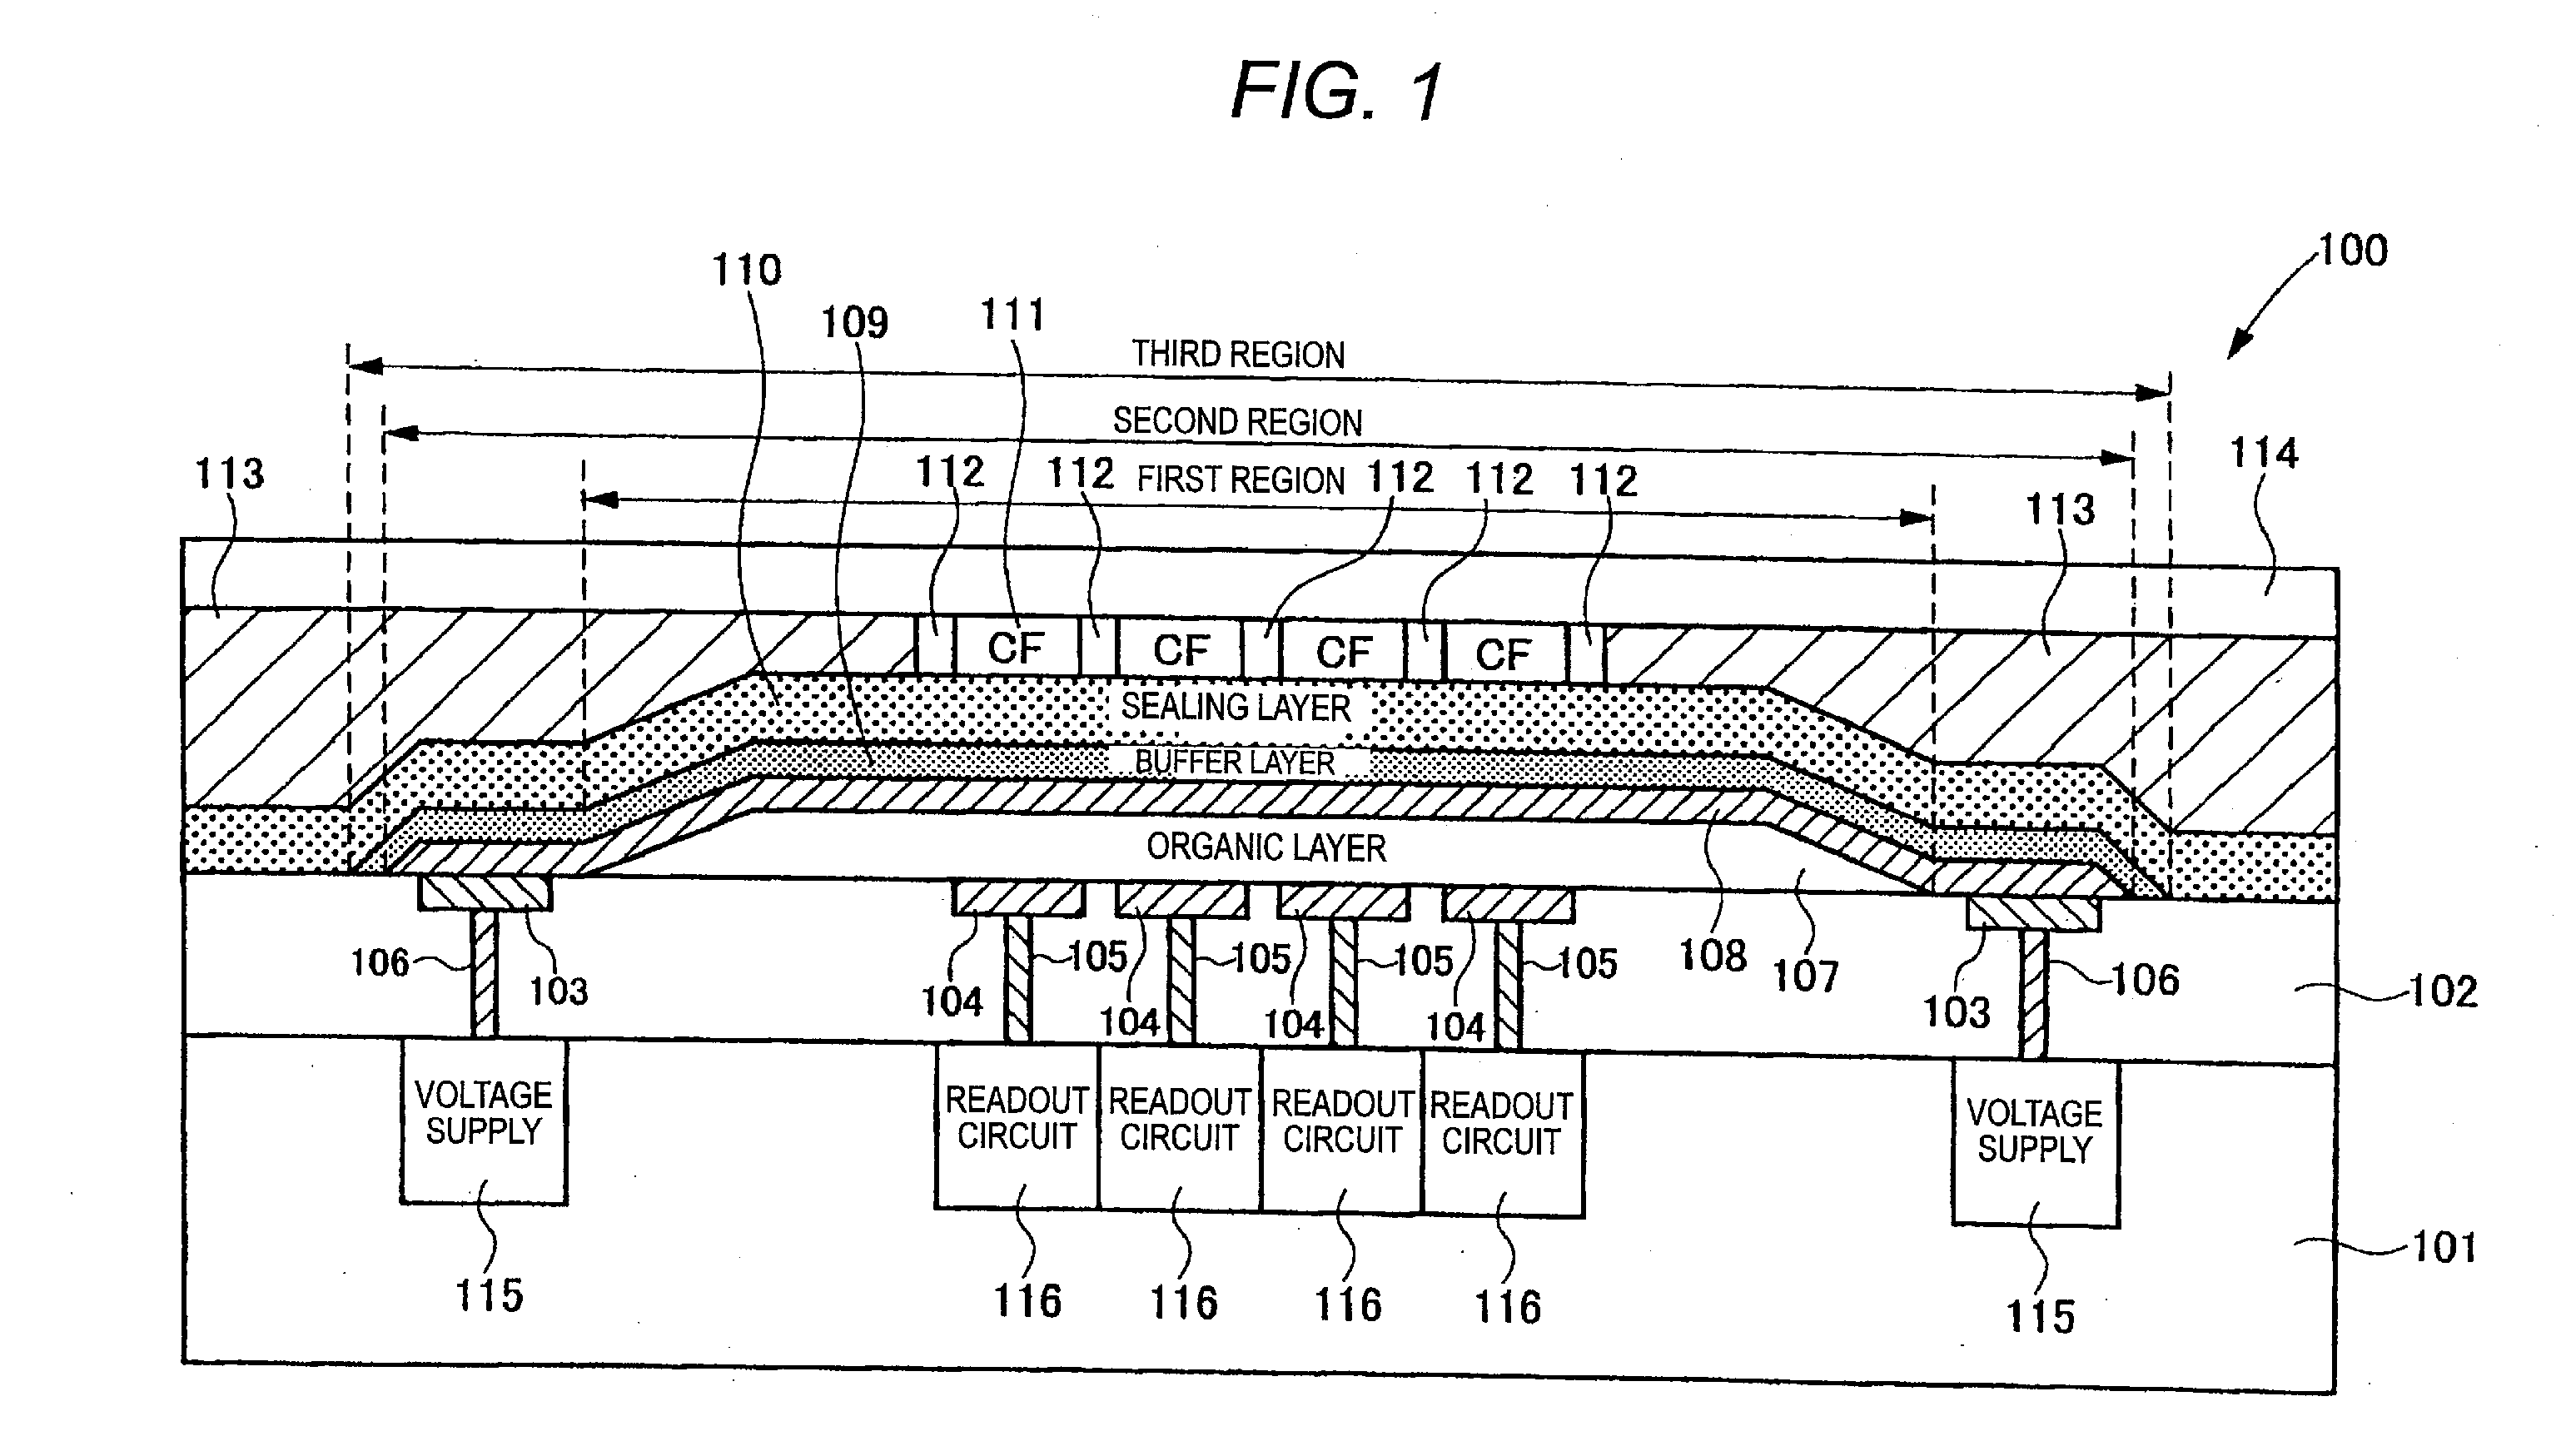 Solid-state imaging device and process of making solid state imaging device